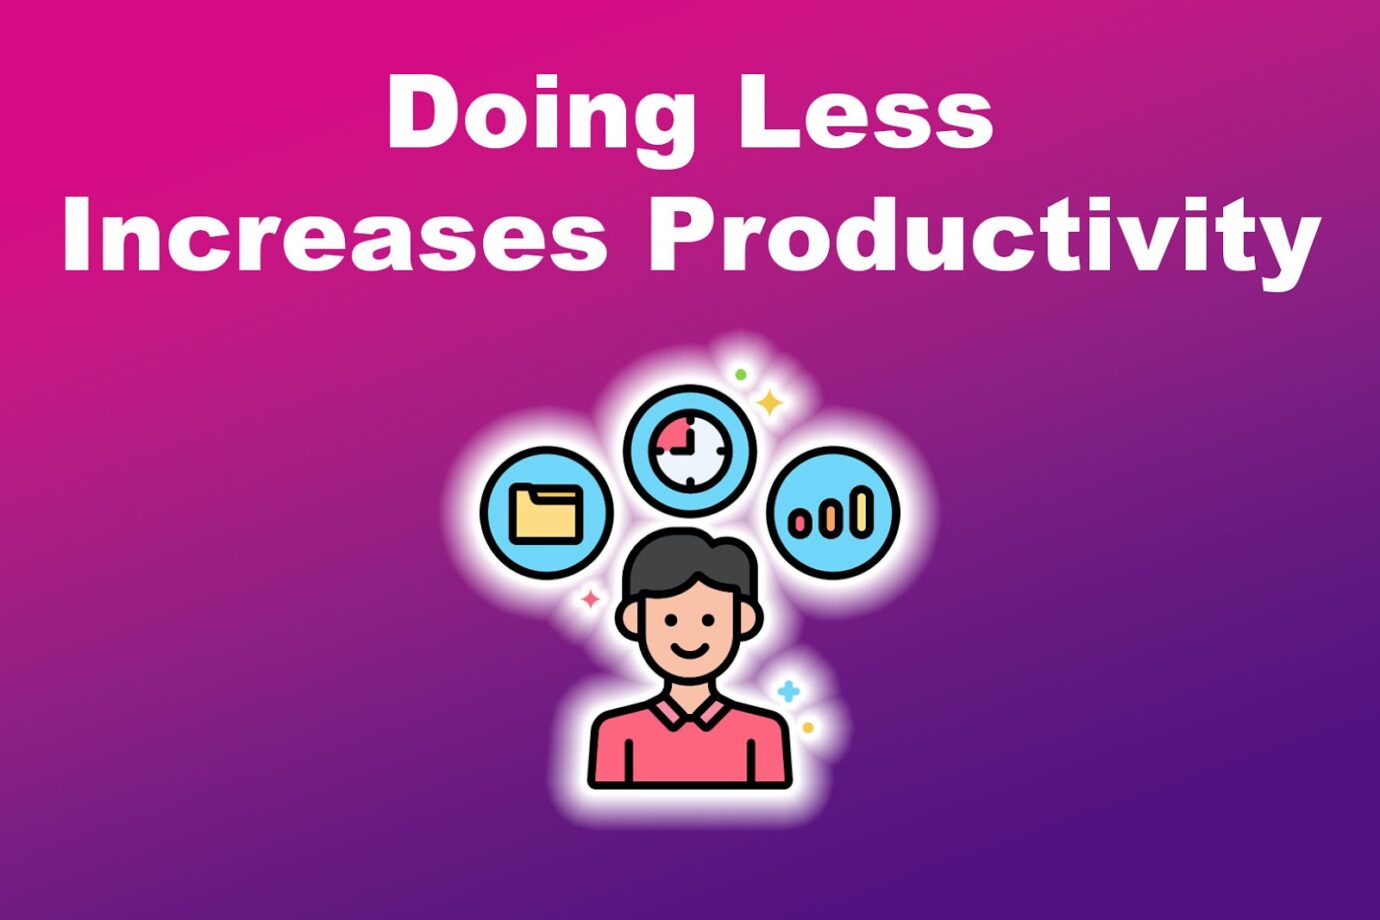 Doing Less Increases Productivity